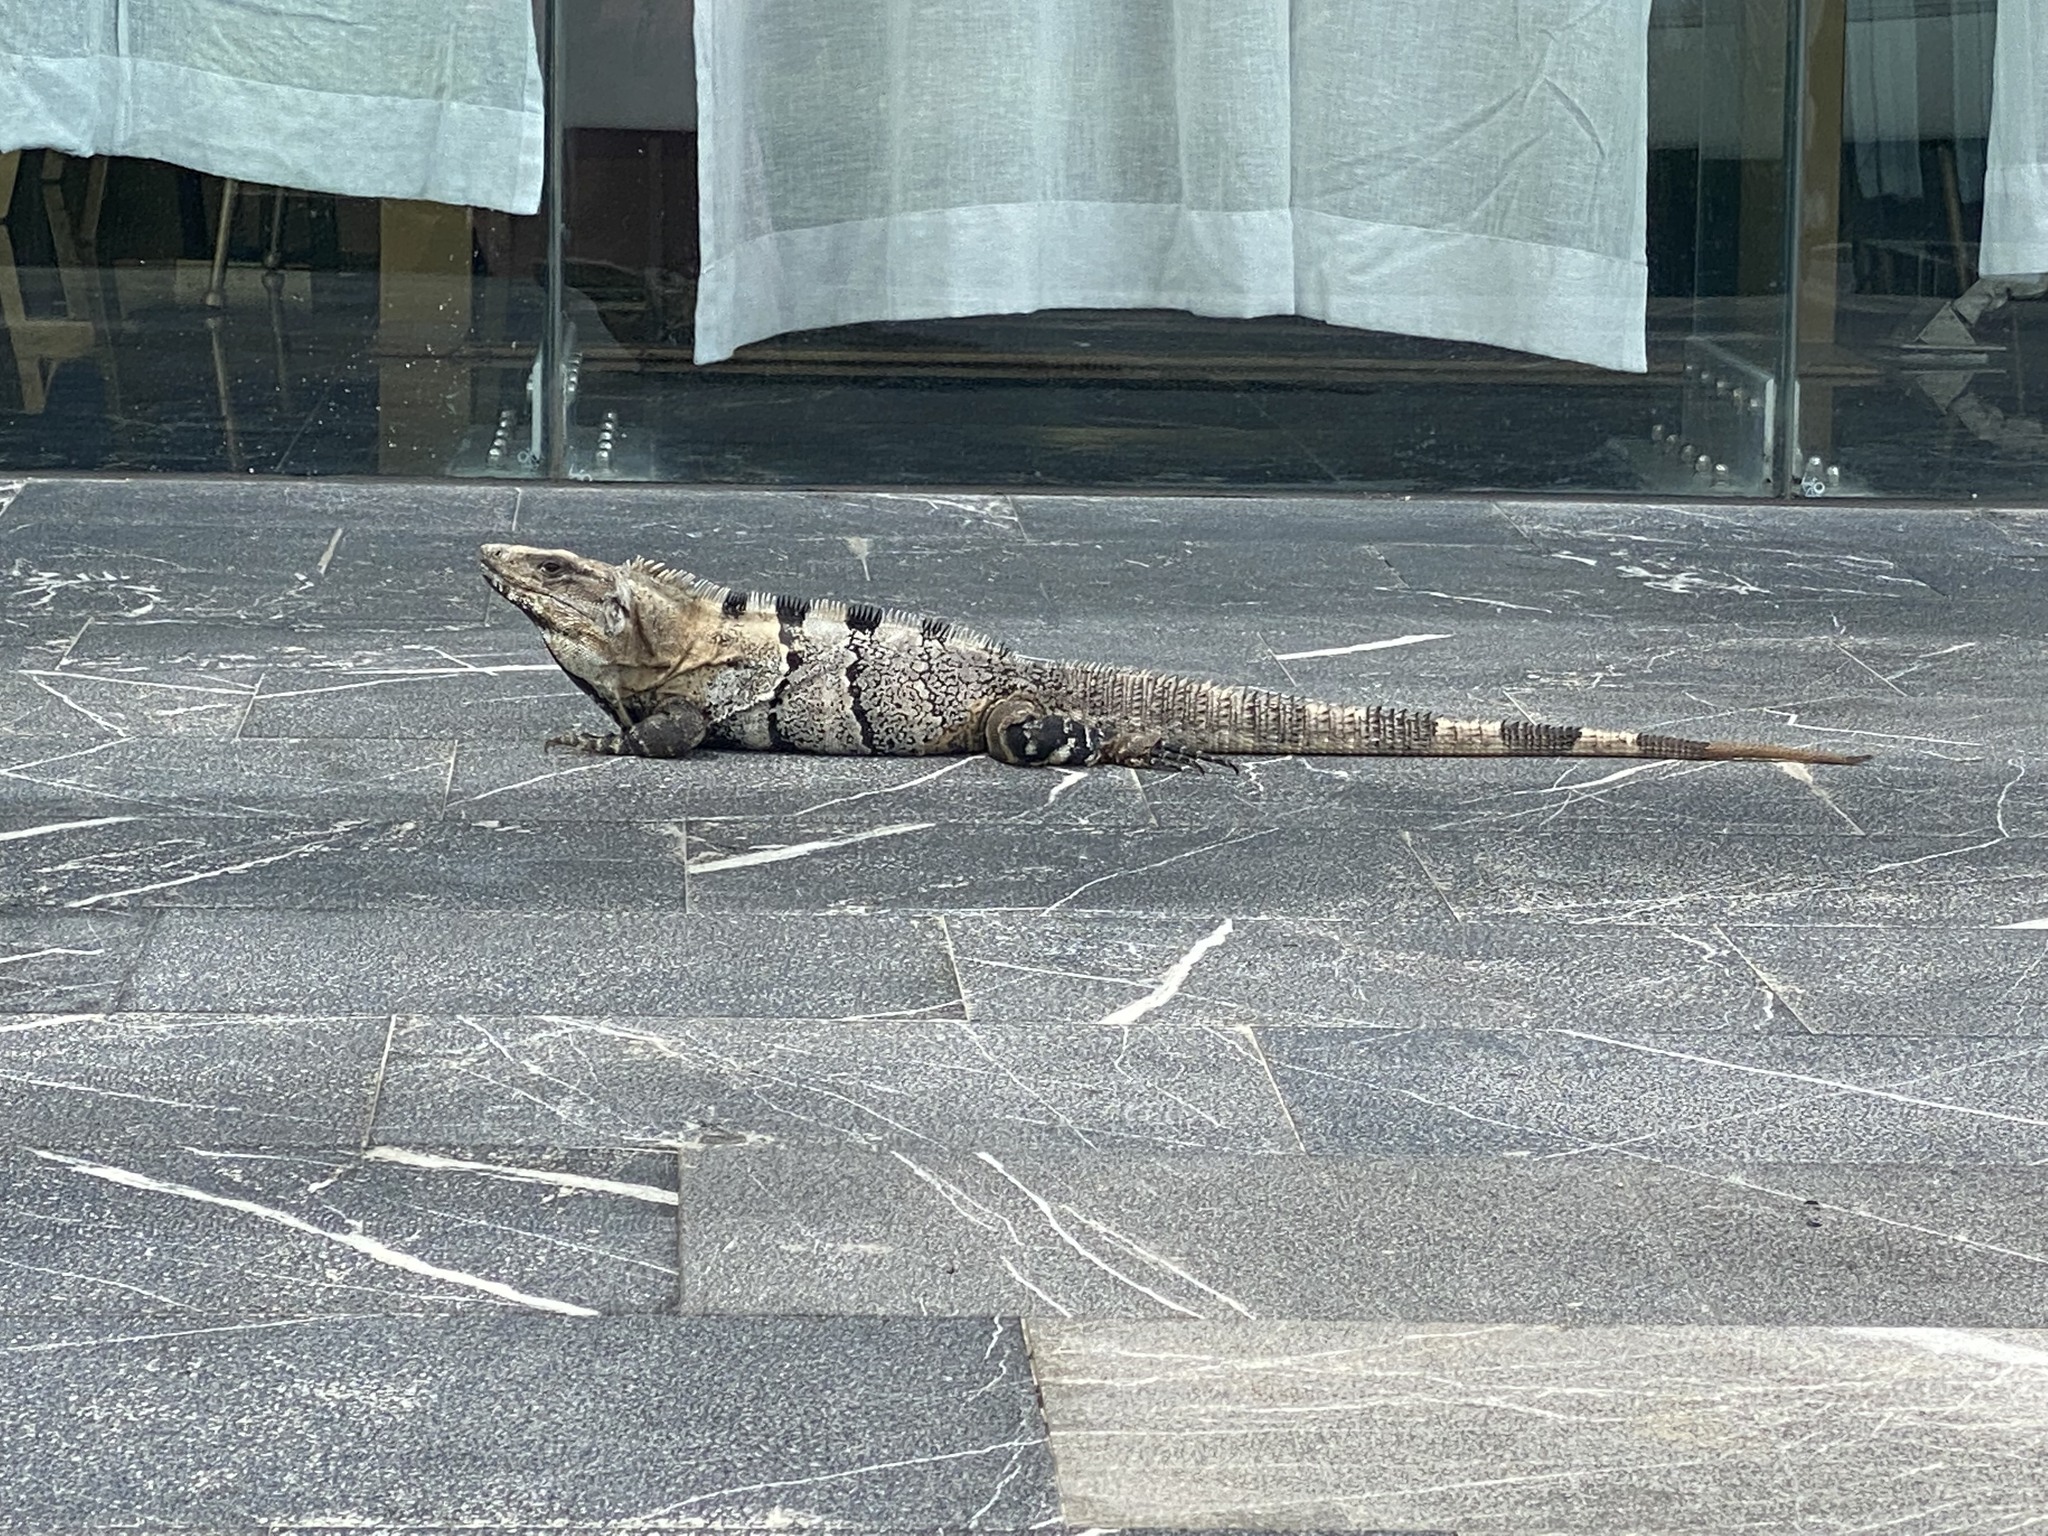 An iguana on property at the TRS Coral hotel in Costa Mujeres, Mexico